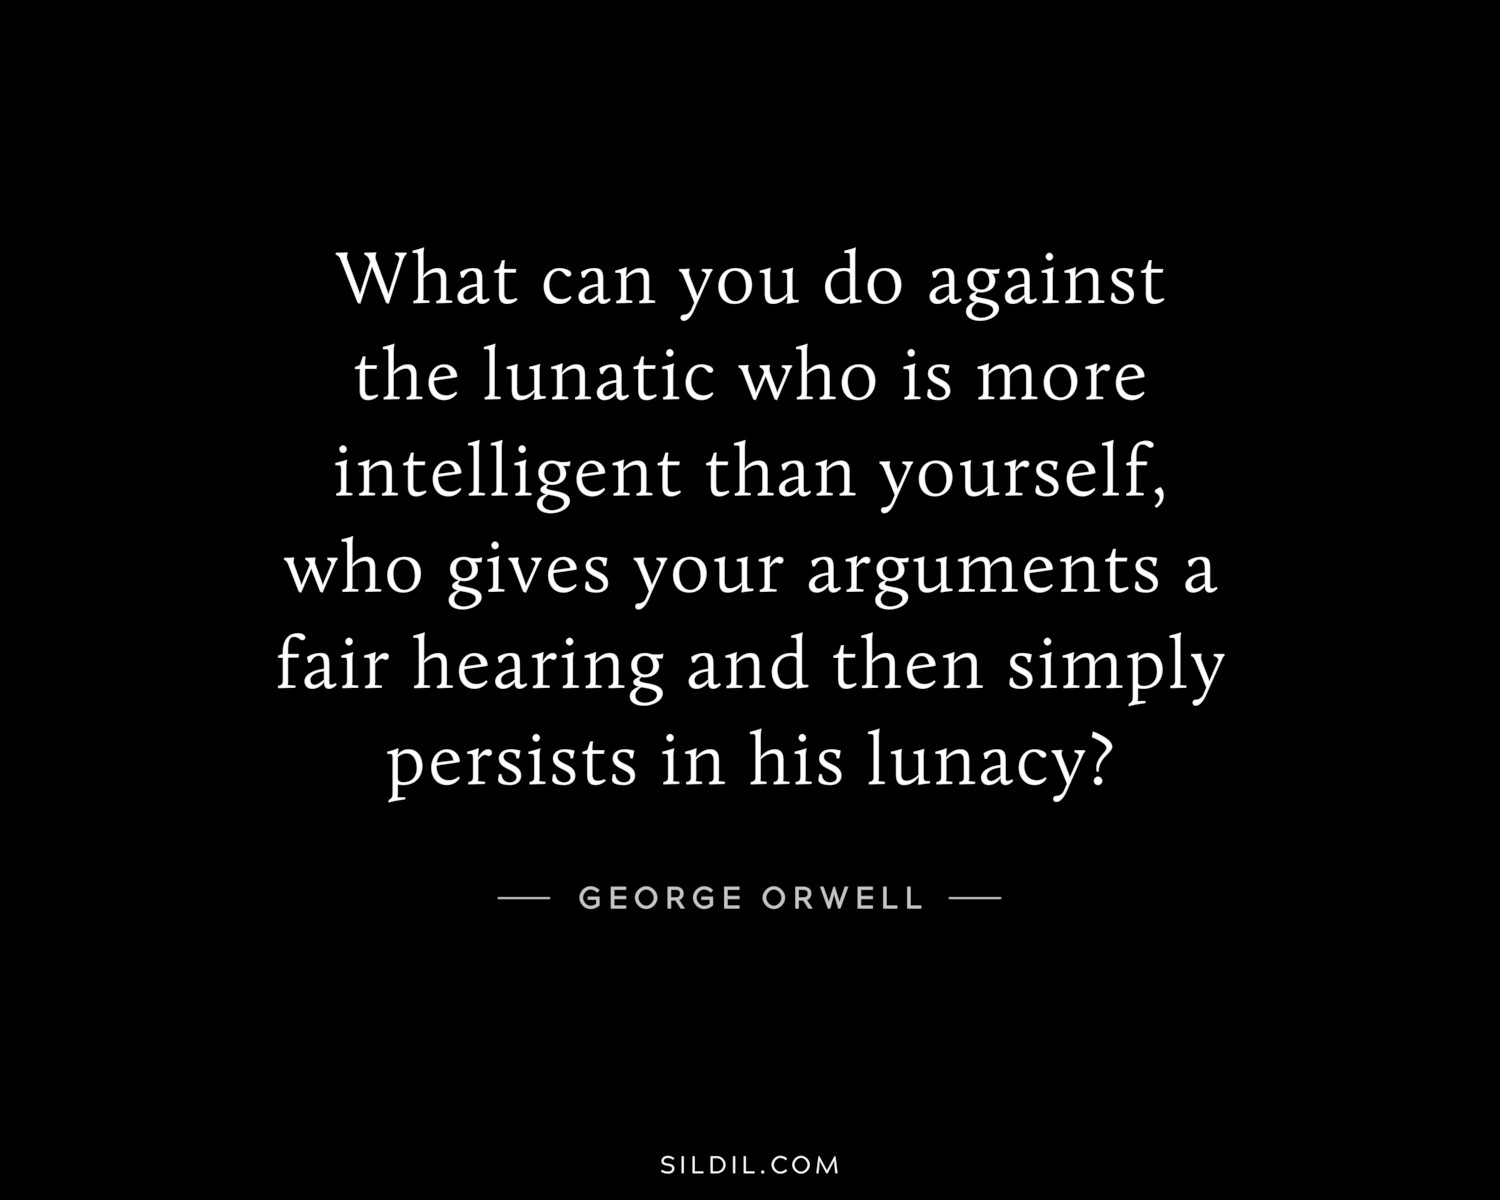 What can you do against the lunatic who is more intelligent than yourself, who gives your arguments a fair hearing and then simply persists in his lunacy?